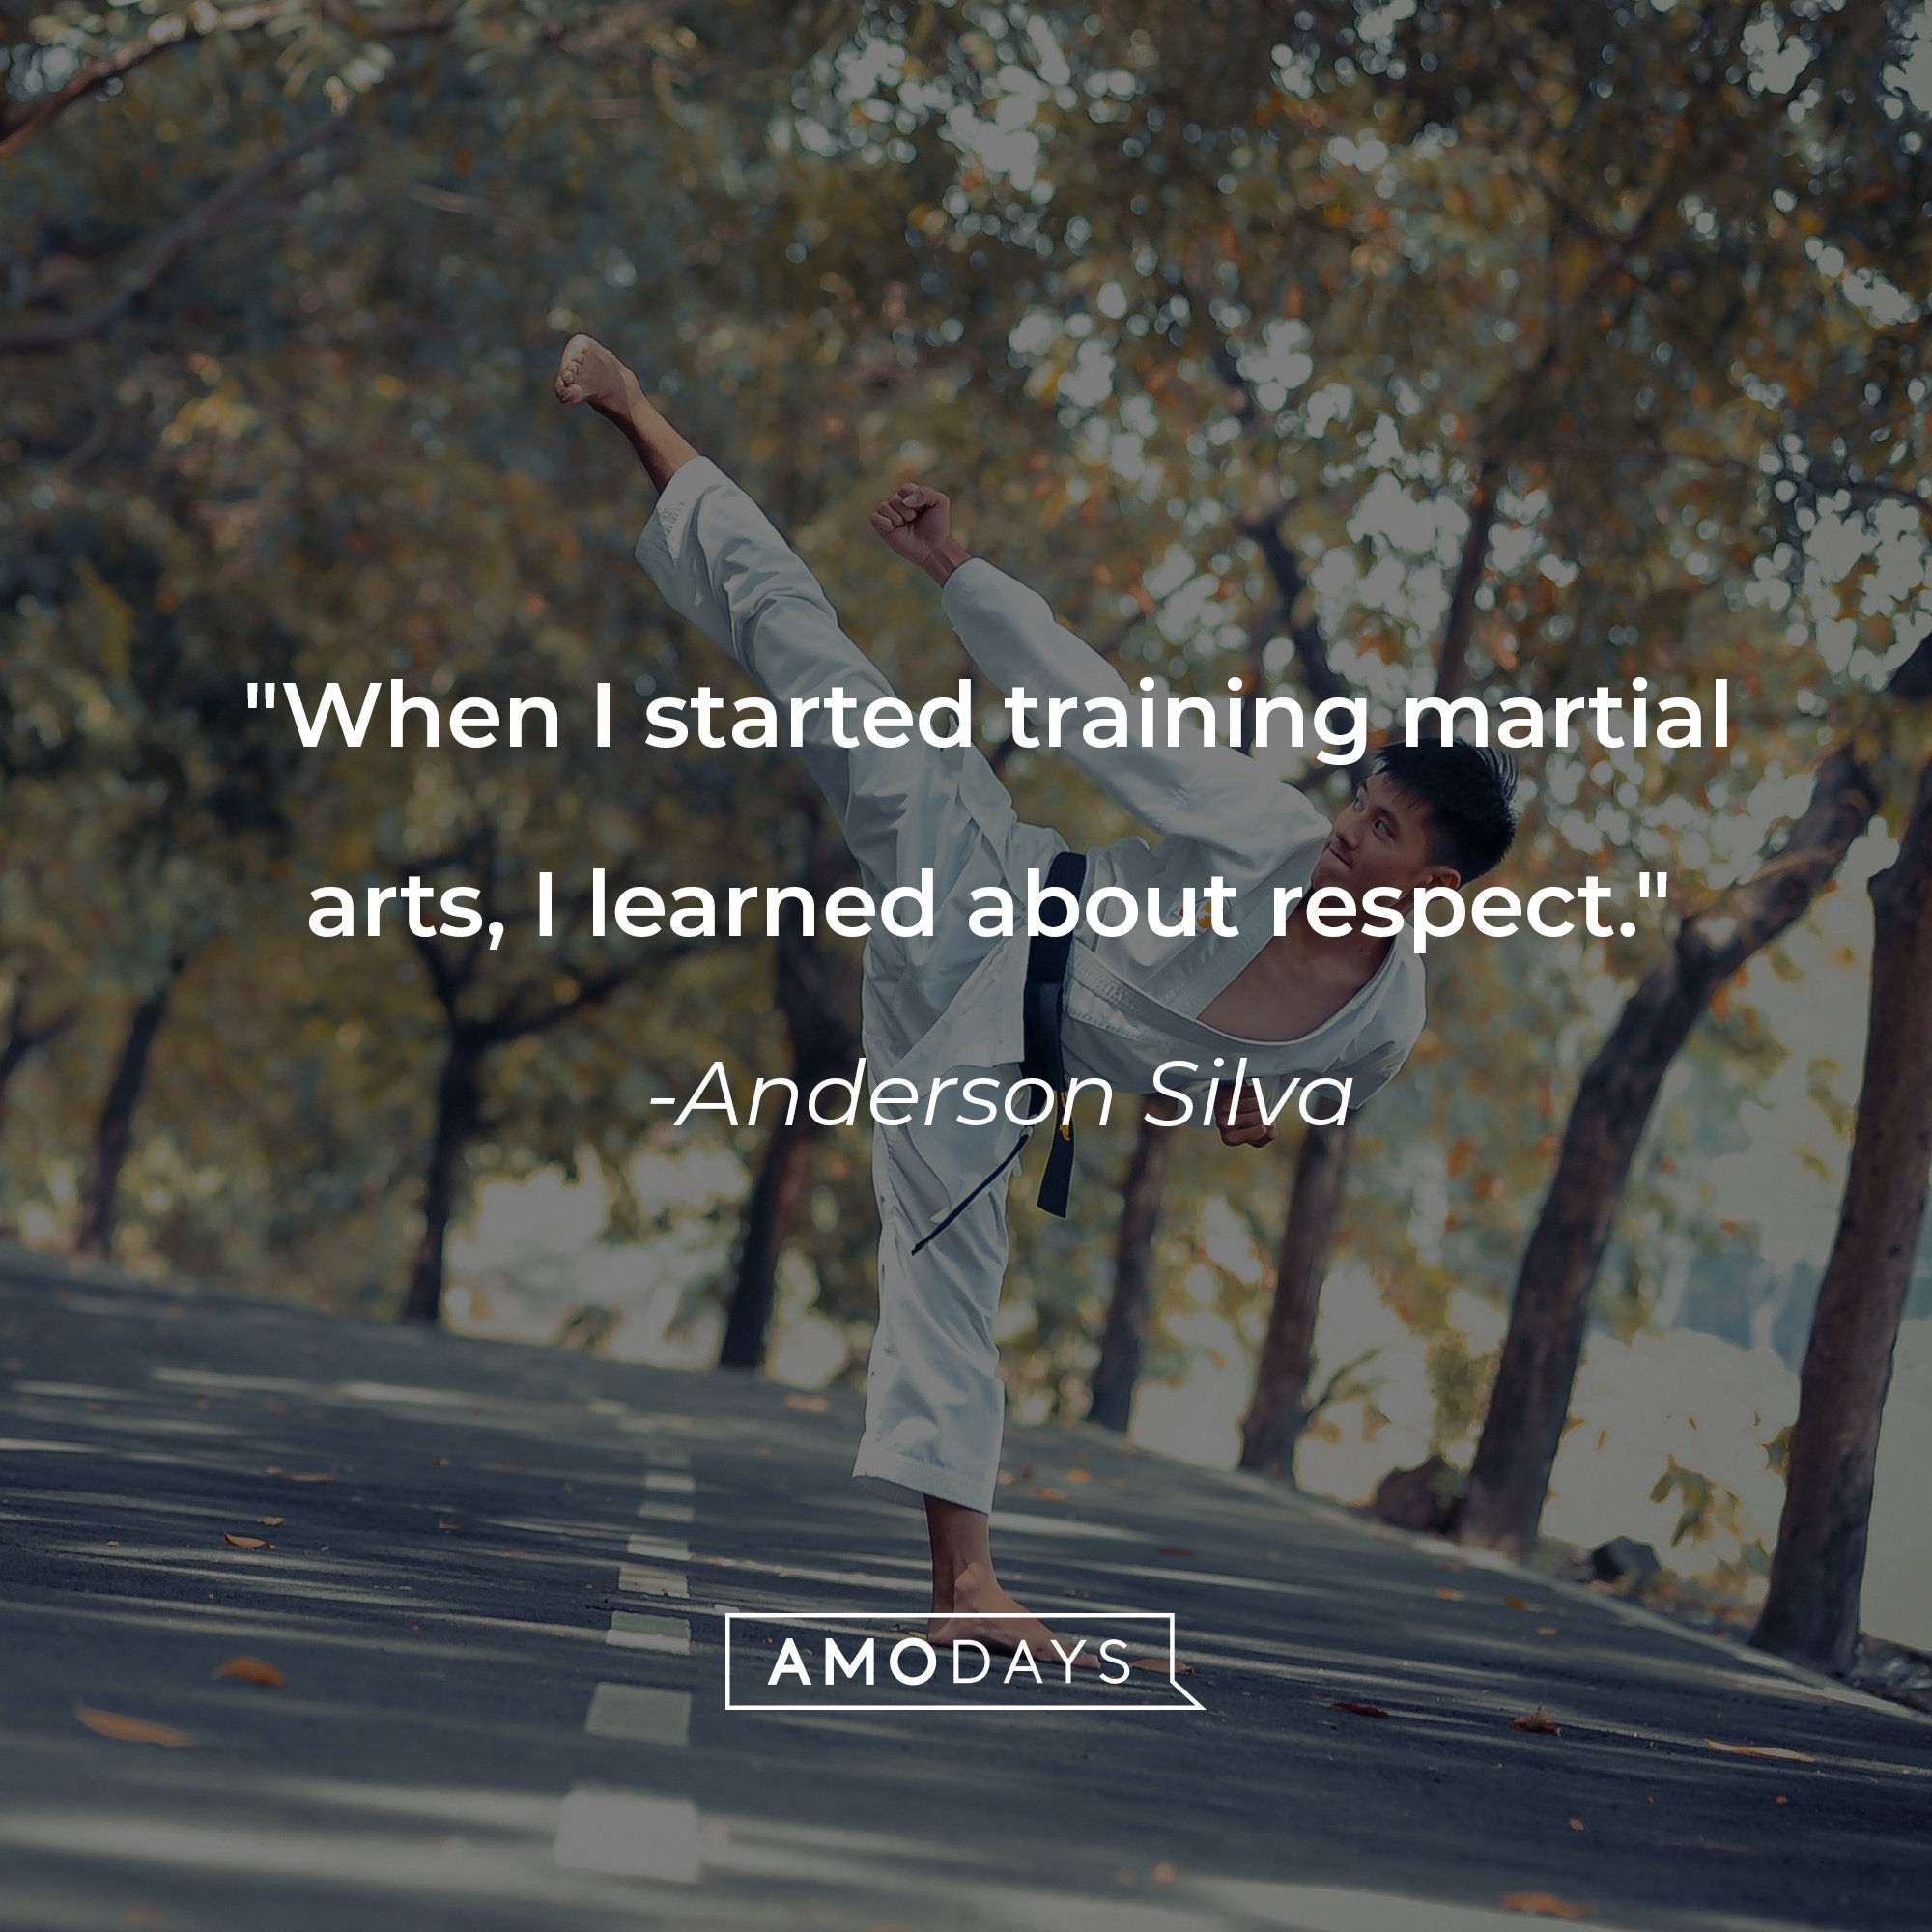 Anderson Silva’s quote: "When I started training martial arts, I learned about respect." | Image: AmoDays 